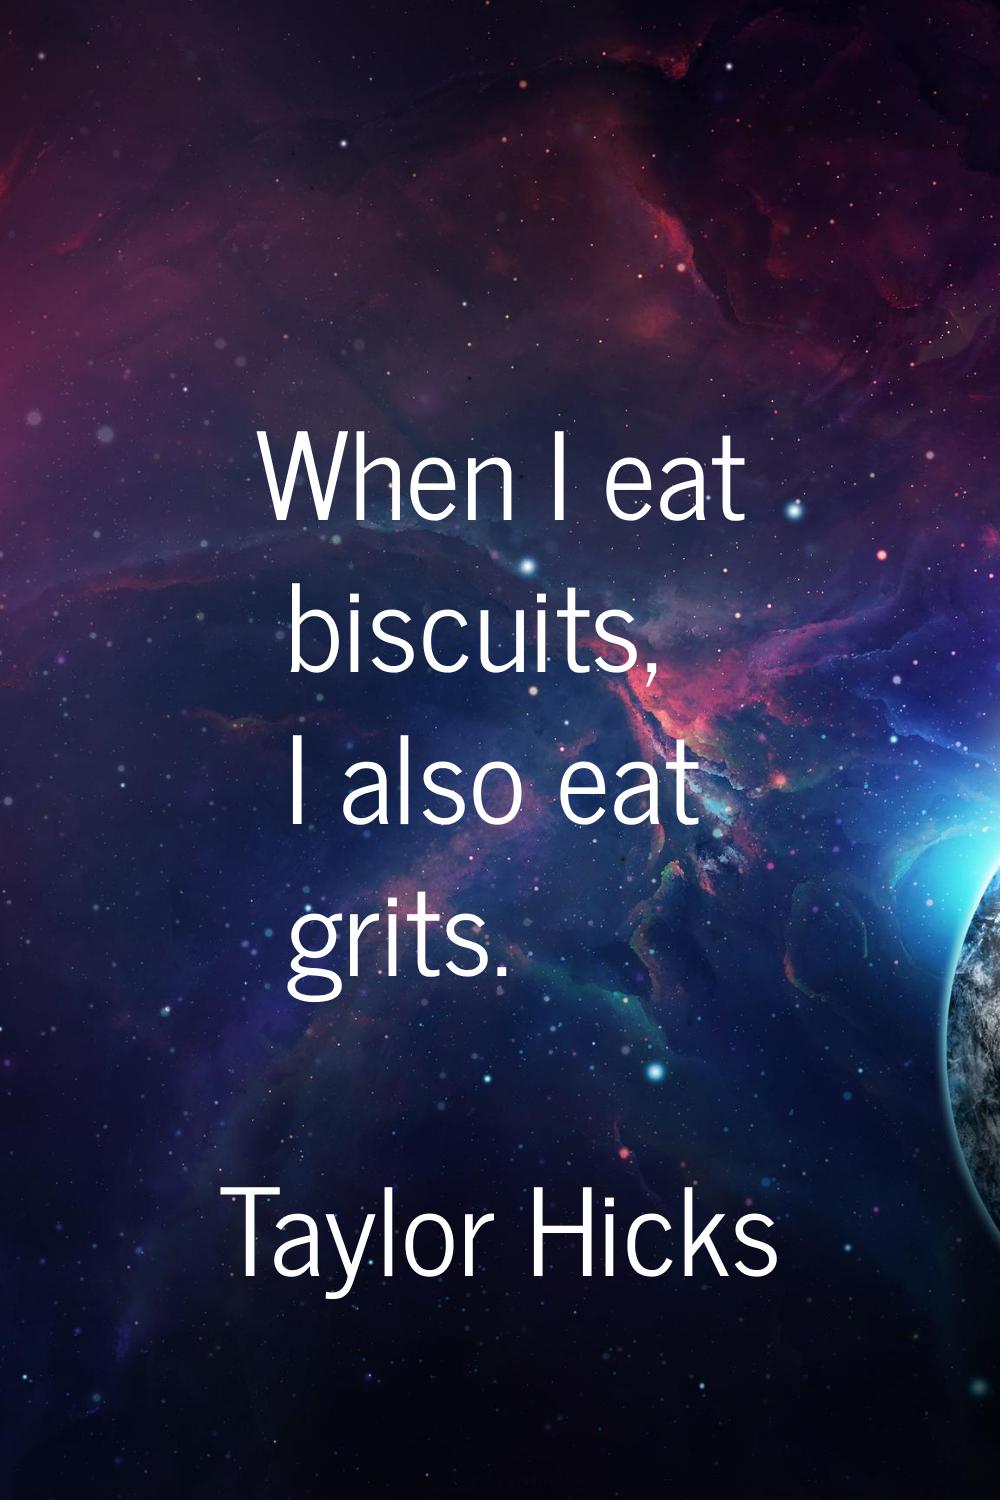 When I eat biscuits, I also eat grits.